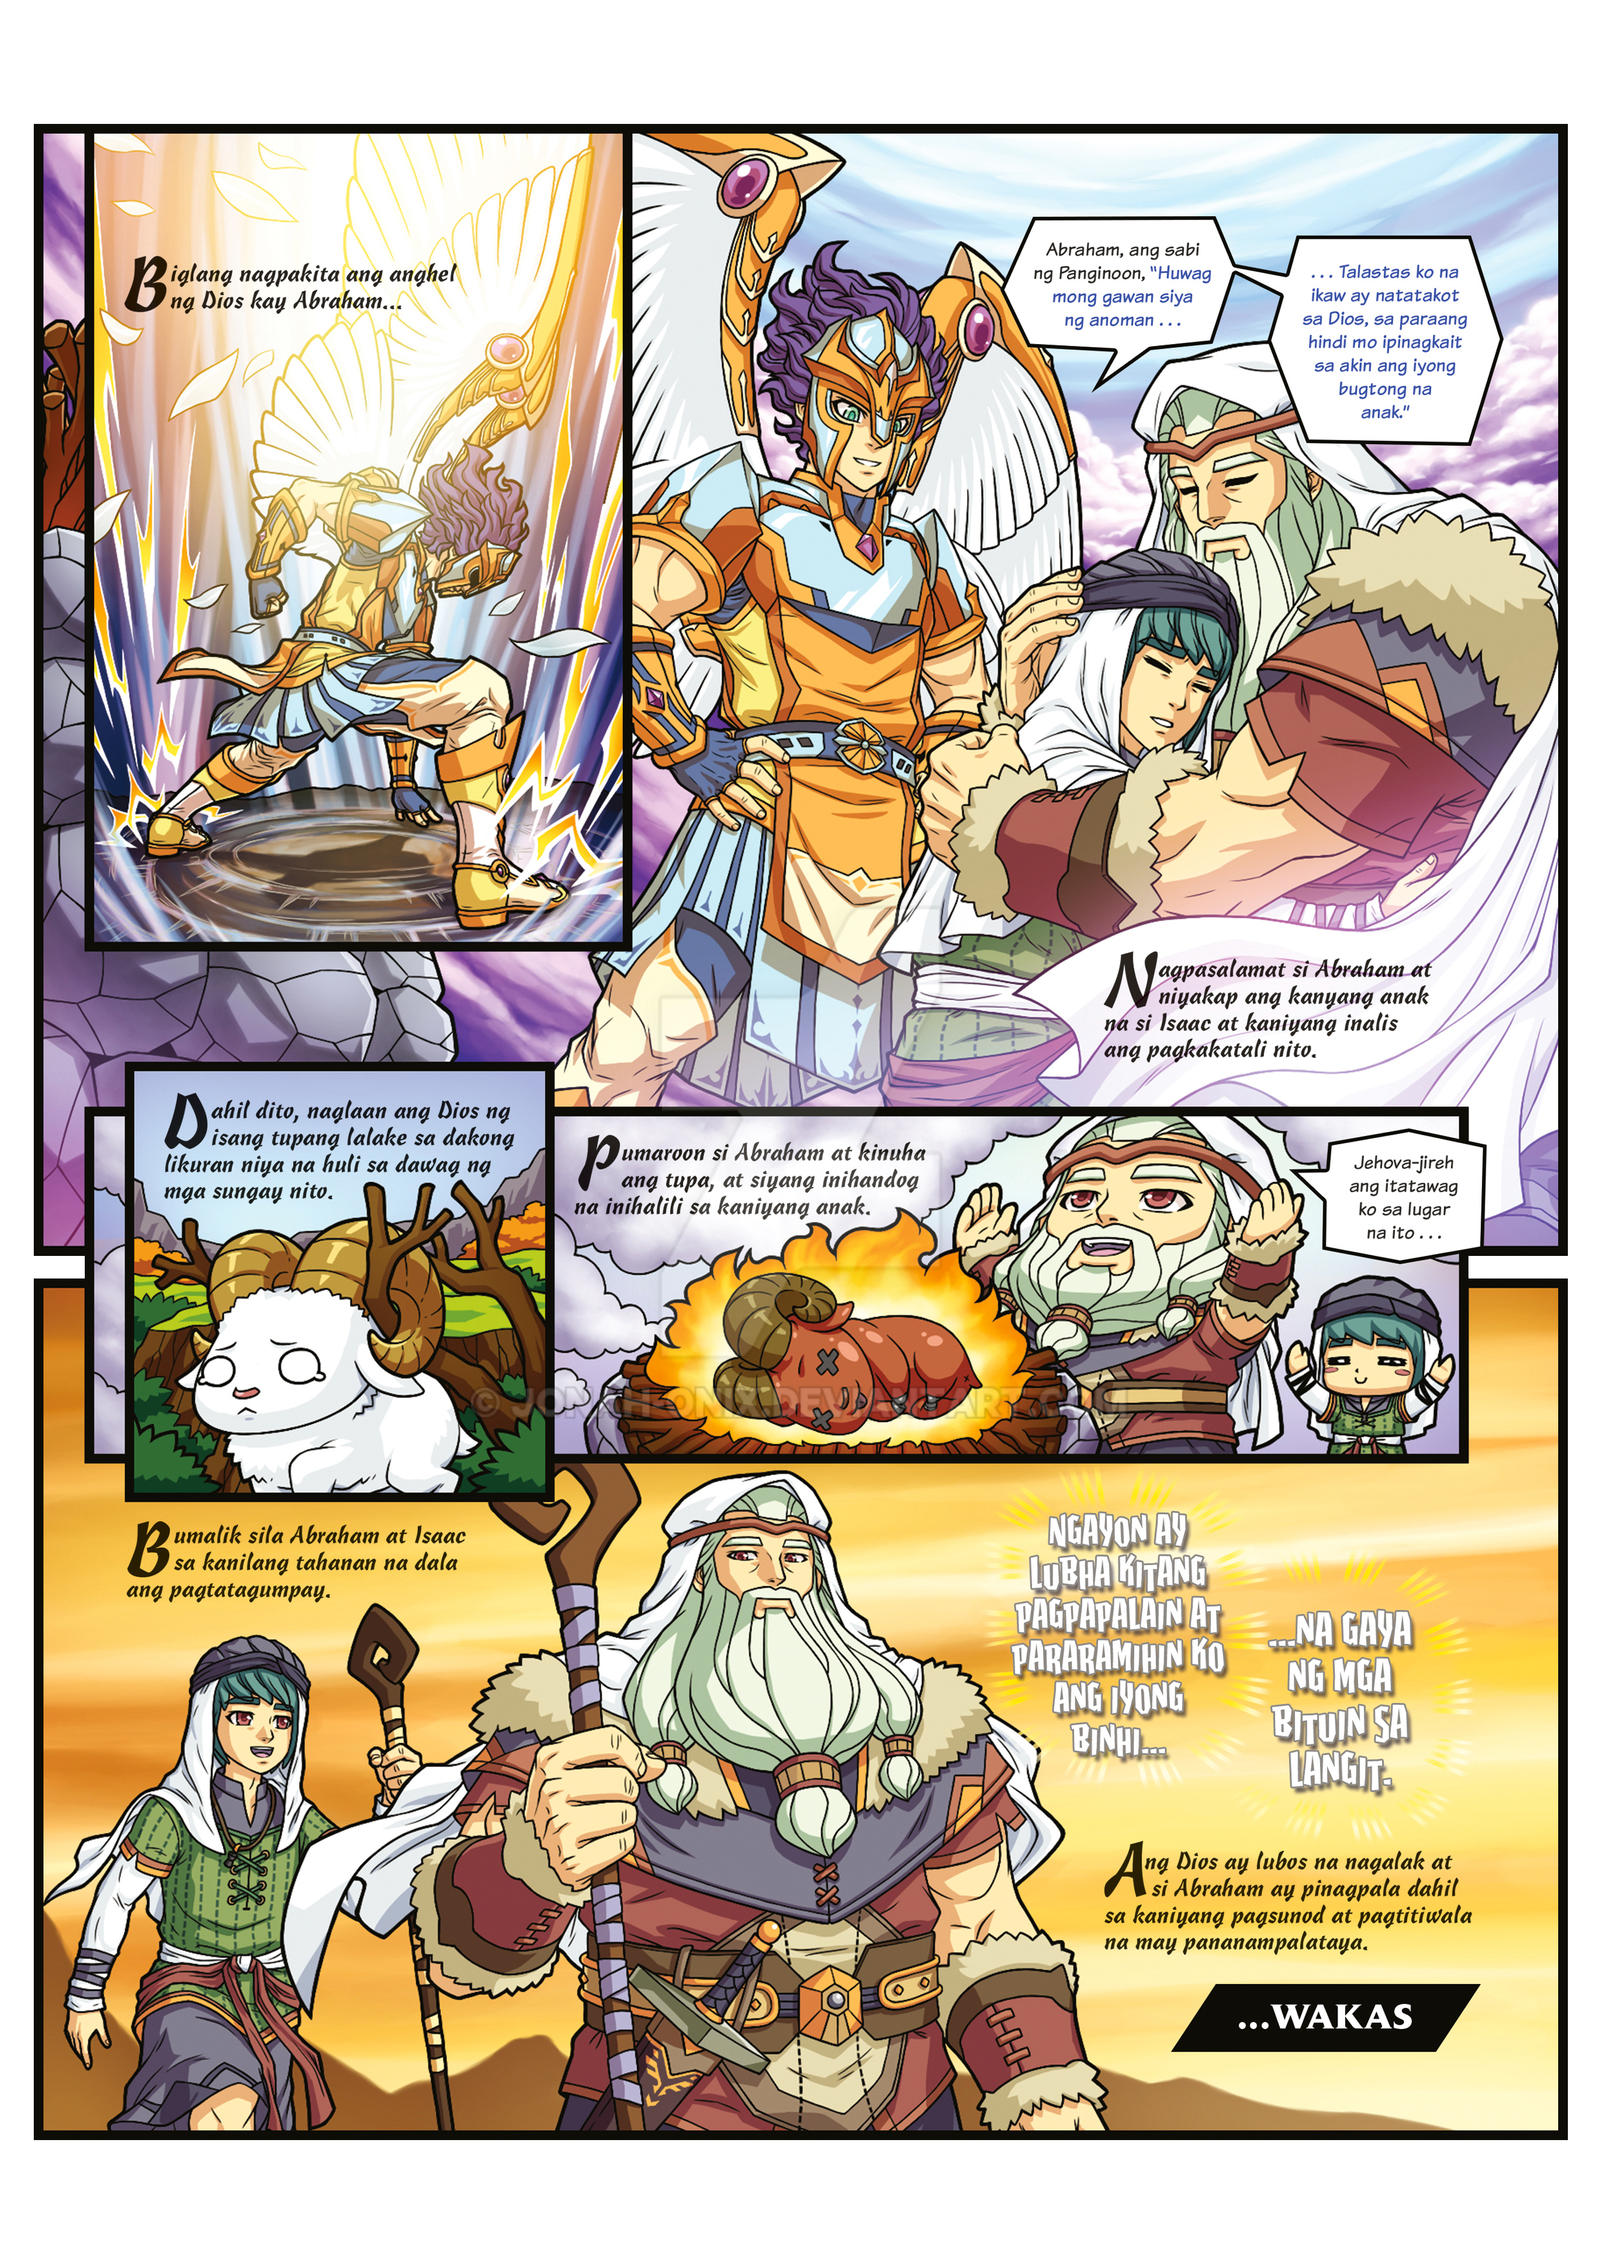 Story of Abraham and Isaac page 4 by jonah-onix on DeviantArt